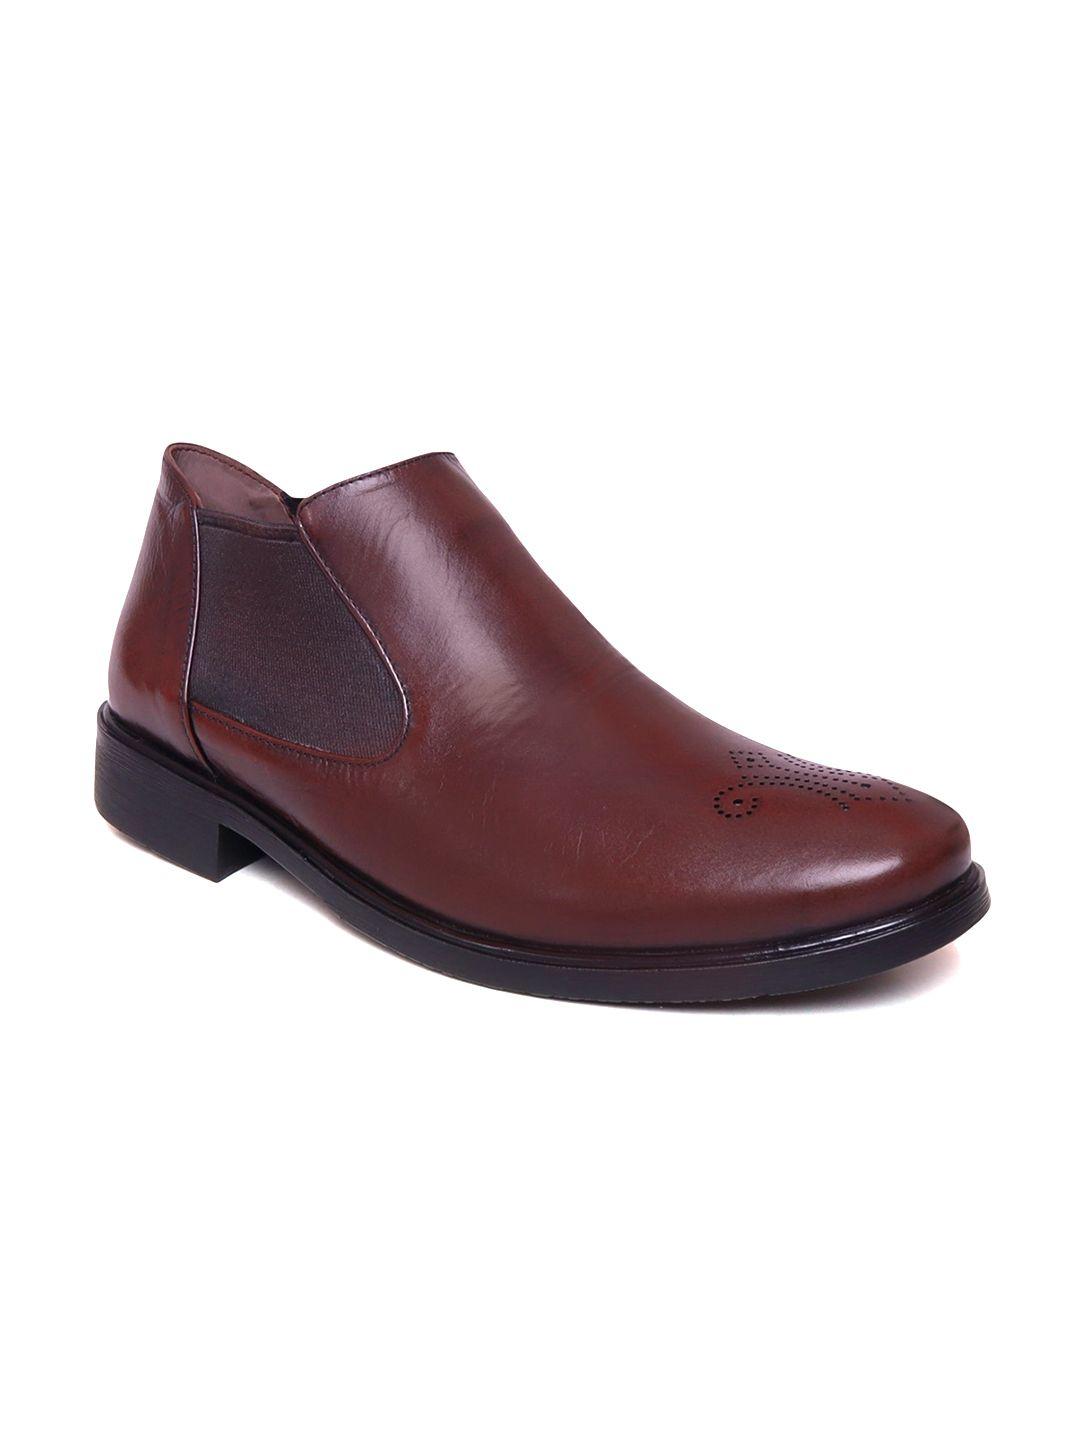 zoom shoes men brown solid chelsea leather boots